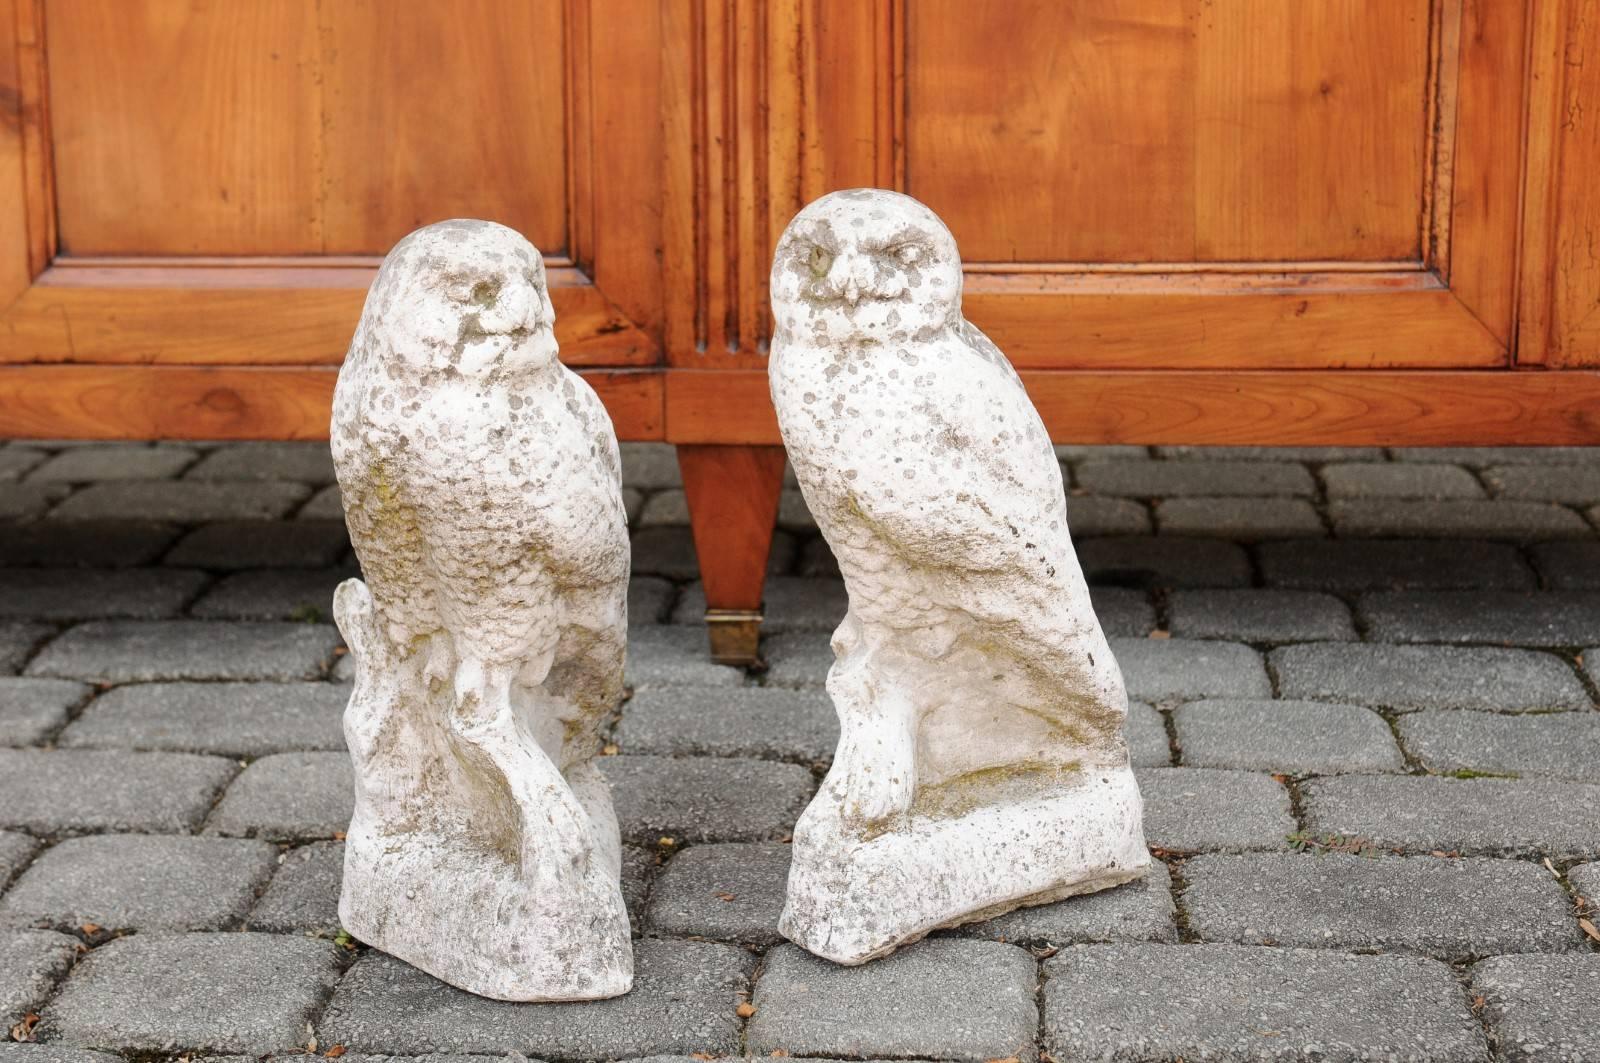 Two French vintage composition owl sculptures from the mid-20th century, priced and sold separately. Each owl features a nicely weathered patina. Peacefully resting on a small branch that seems to emerge from a shaped base, each owl is depicted with